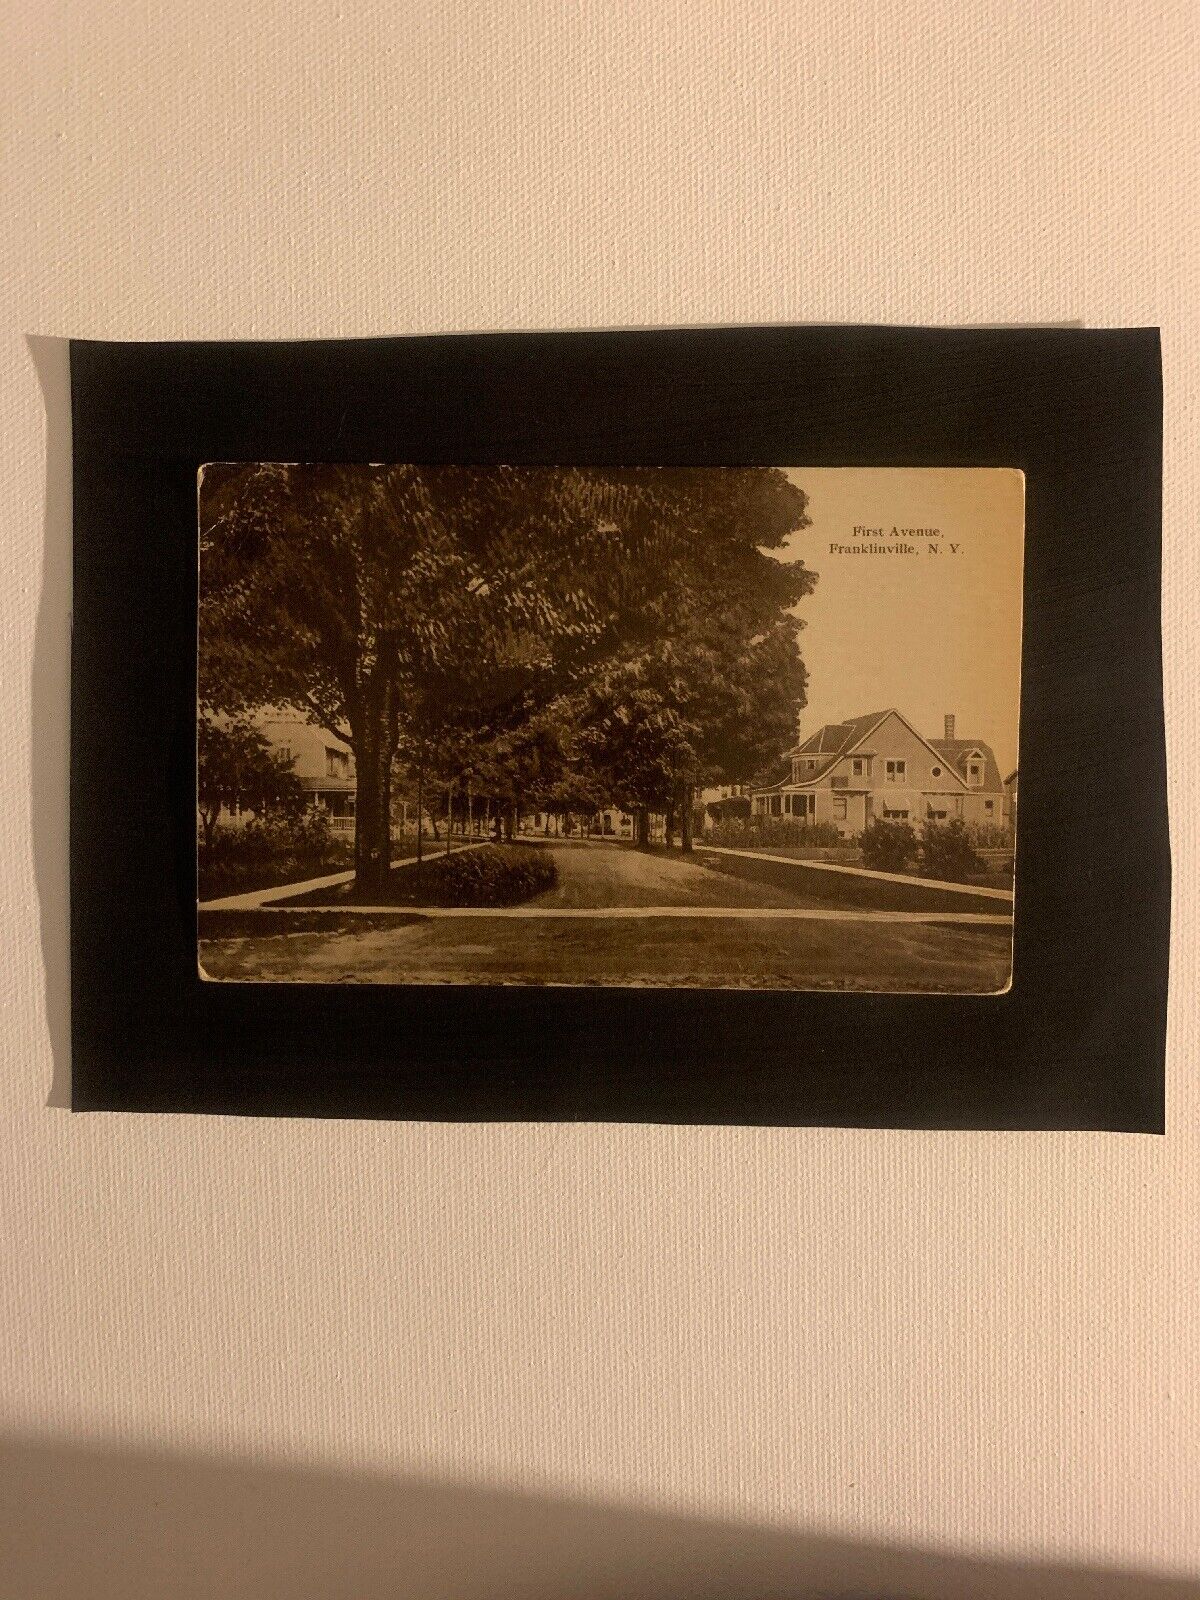 Antique Real Photo Postcard Black And White 1St Ave., Franklinville, Ny